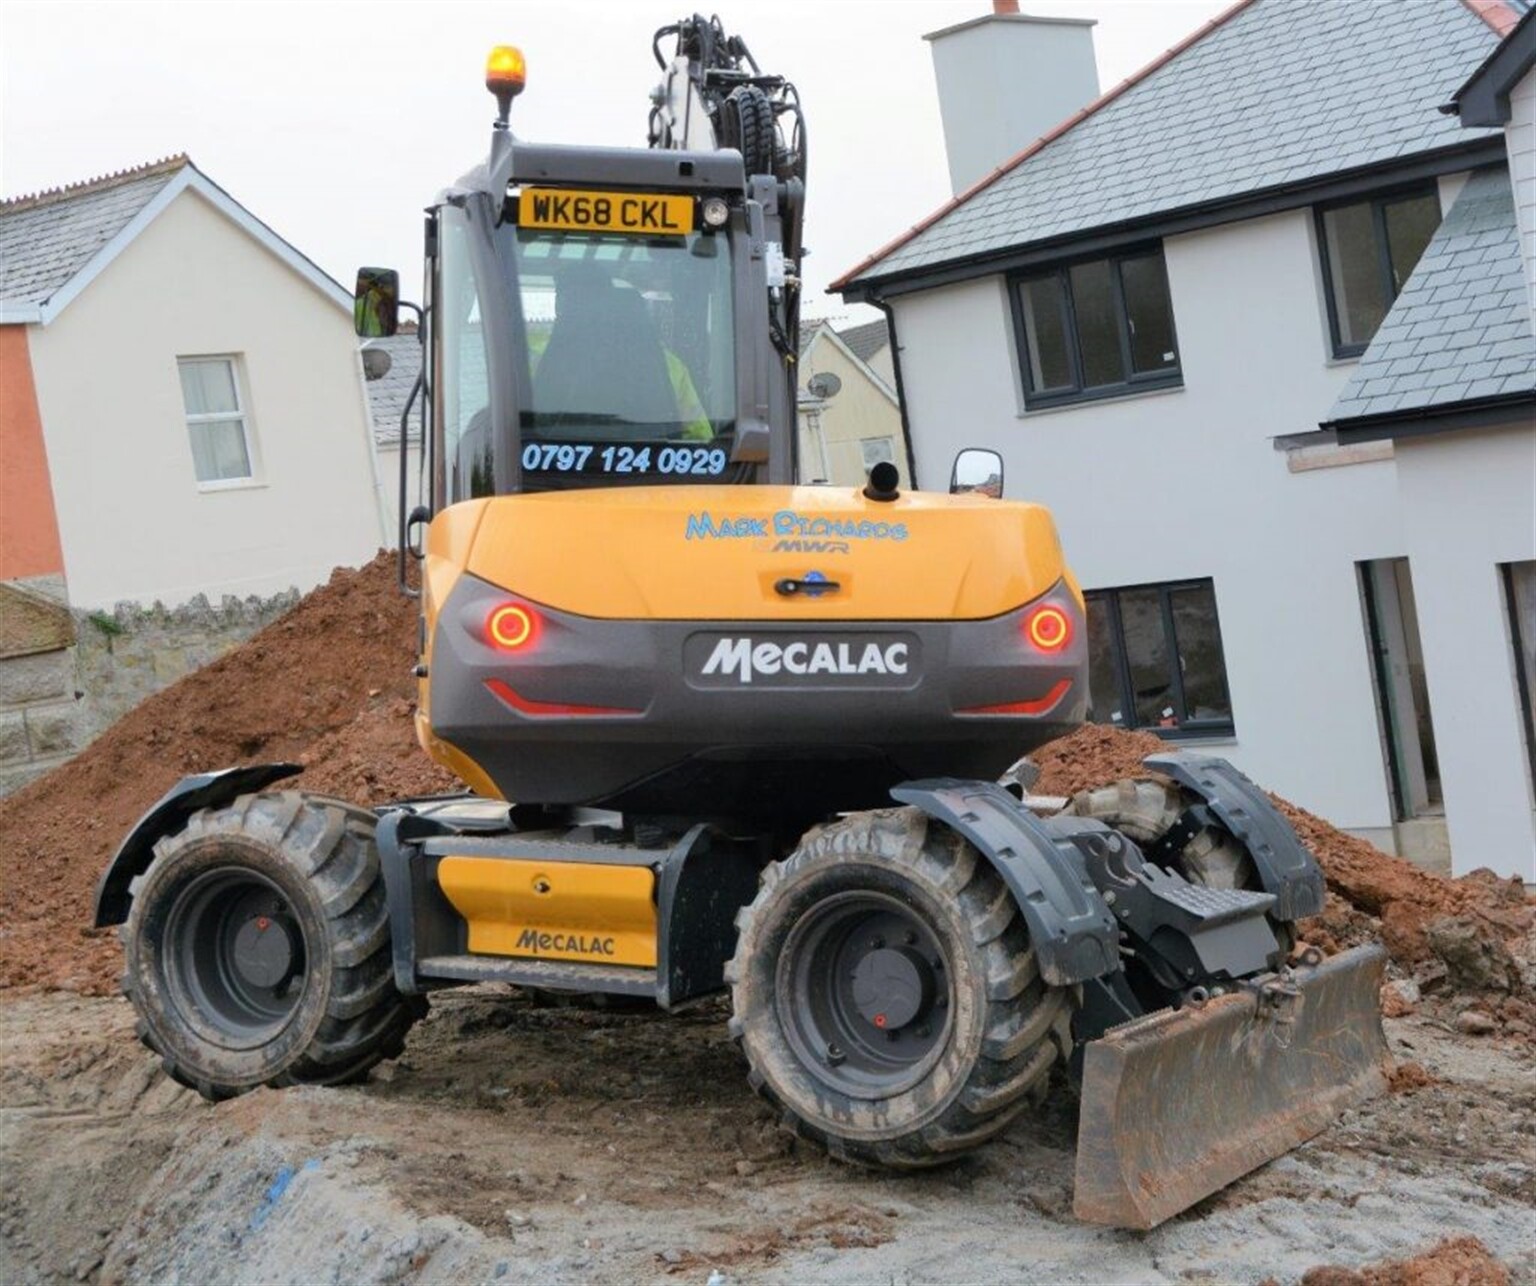 Marvellous Mecalac in Kernow